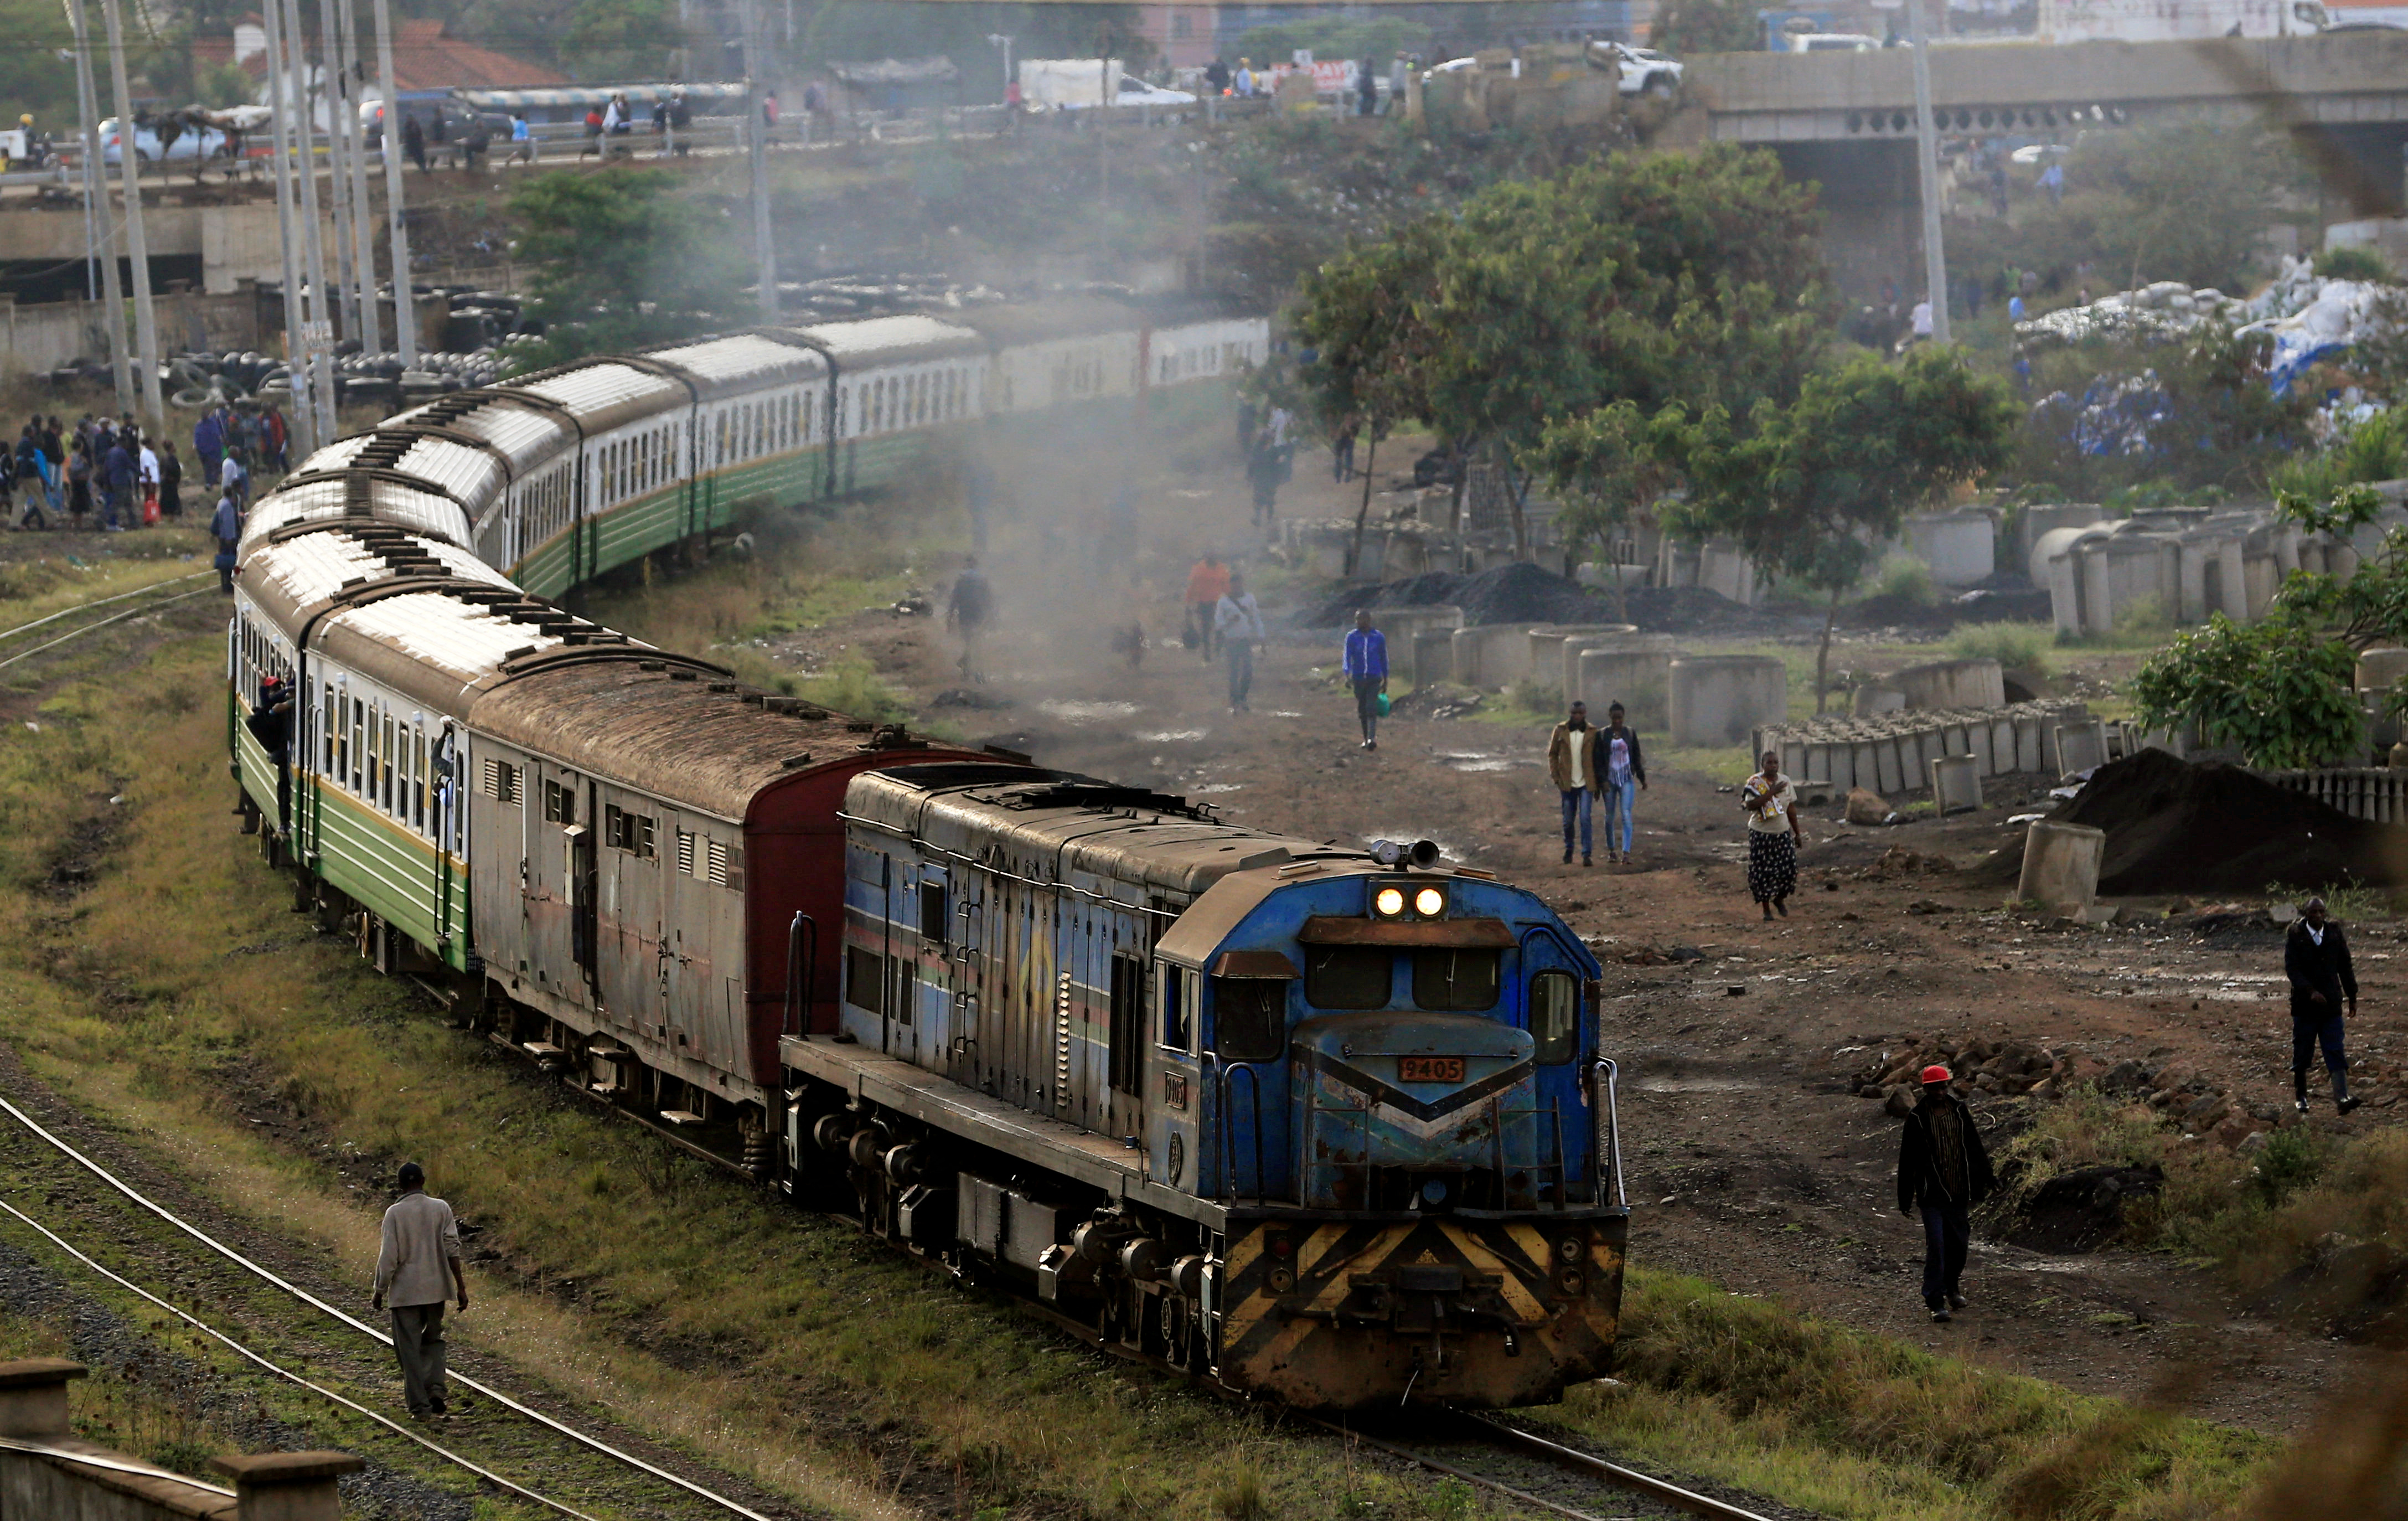 A commuter train of the Nairobi Commuter Rail Service (NCRS) travels from the Donholm station during a strike by the Federation of Public Transport operators in Nairobi